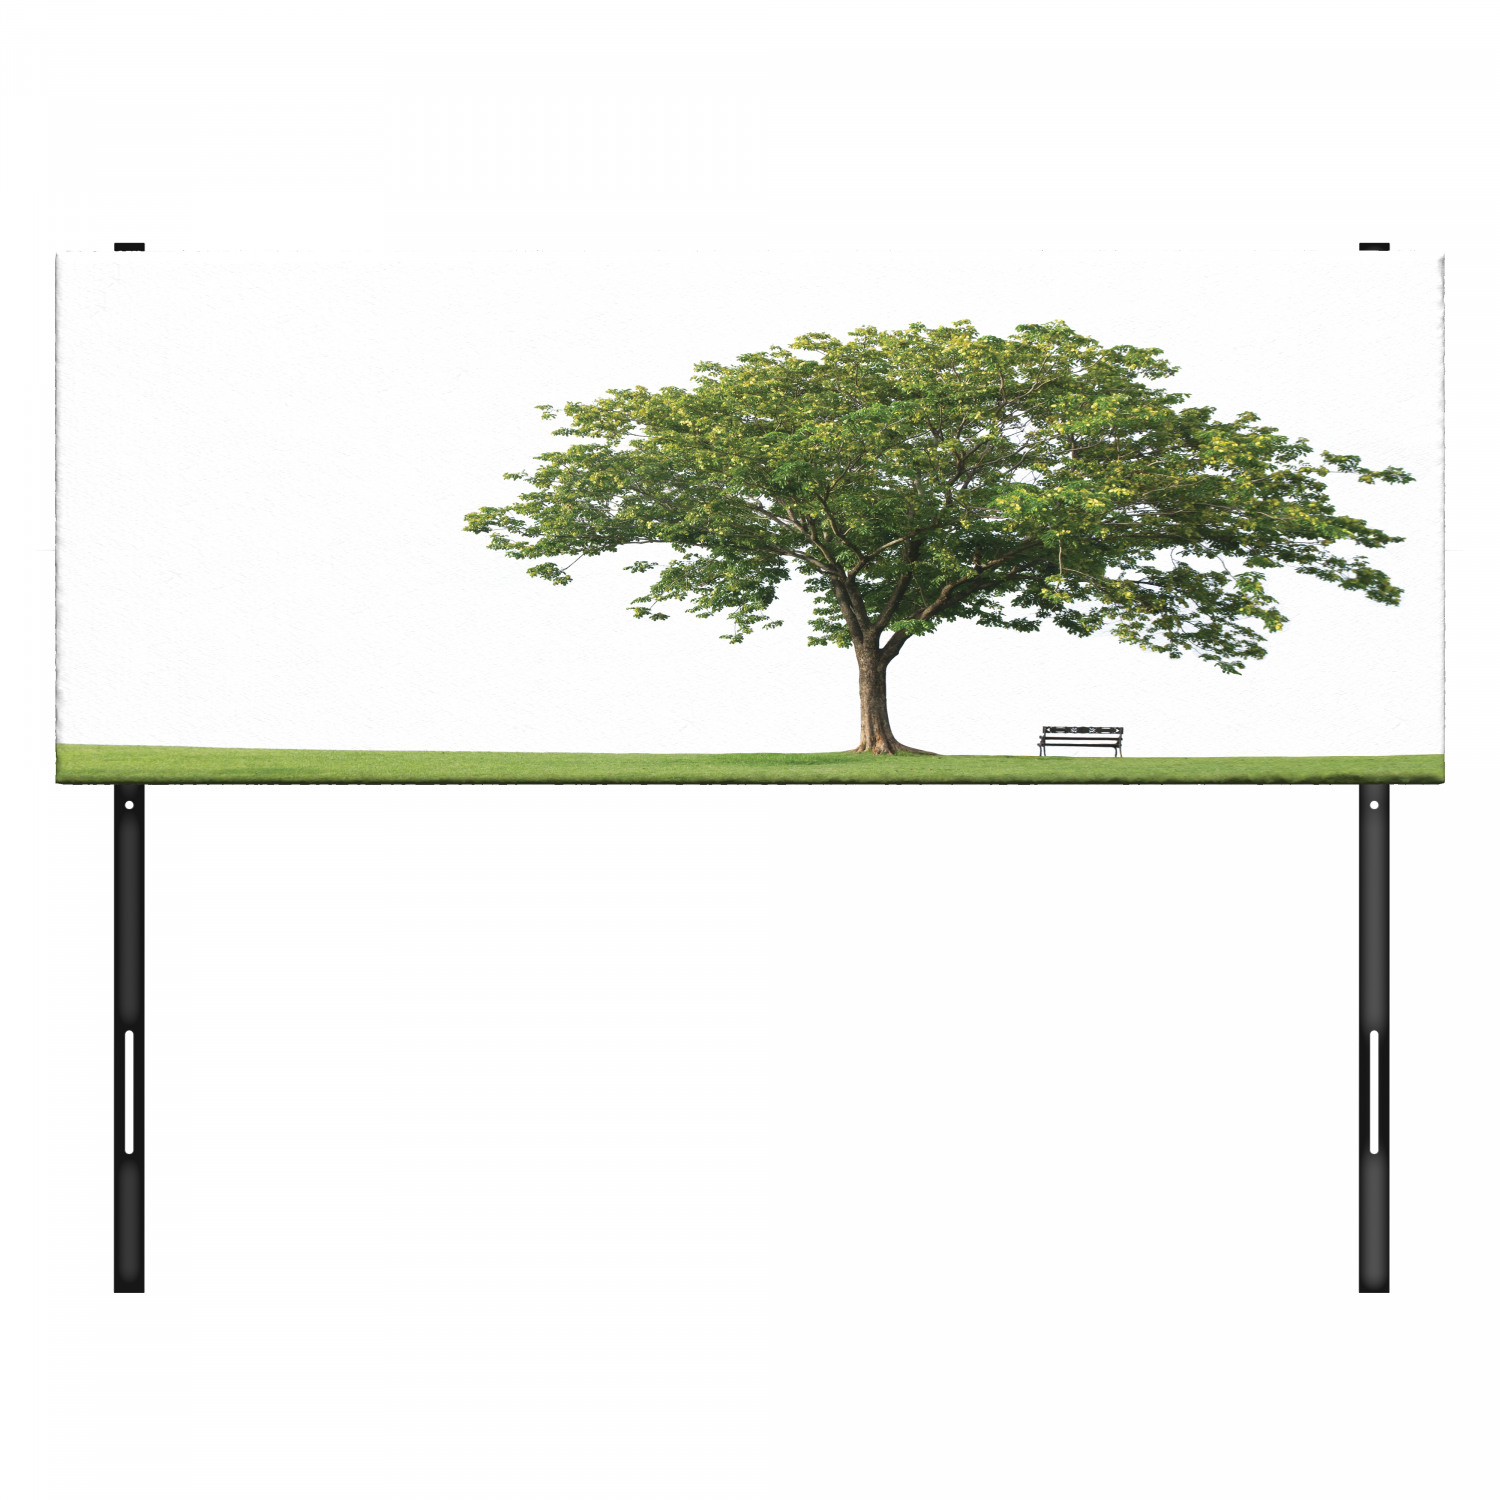 Tree Headboard, Bench Under Majestic Tree Looks Like Solitude in Habitat Environment Design, Upholstered Decorative Metal Bed Headboard with Memory Foam, Full Size, Green White, by Ambesonne - image 3 of 4